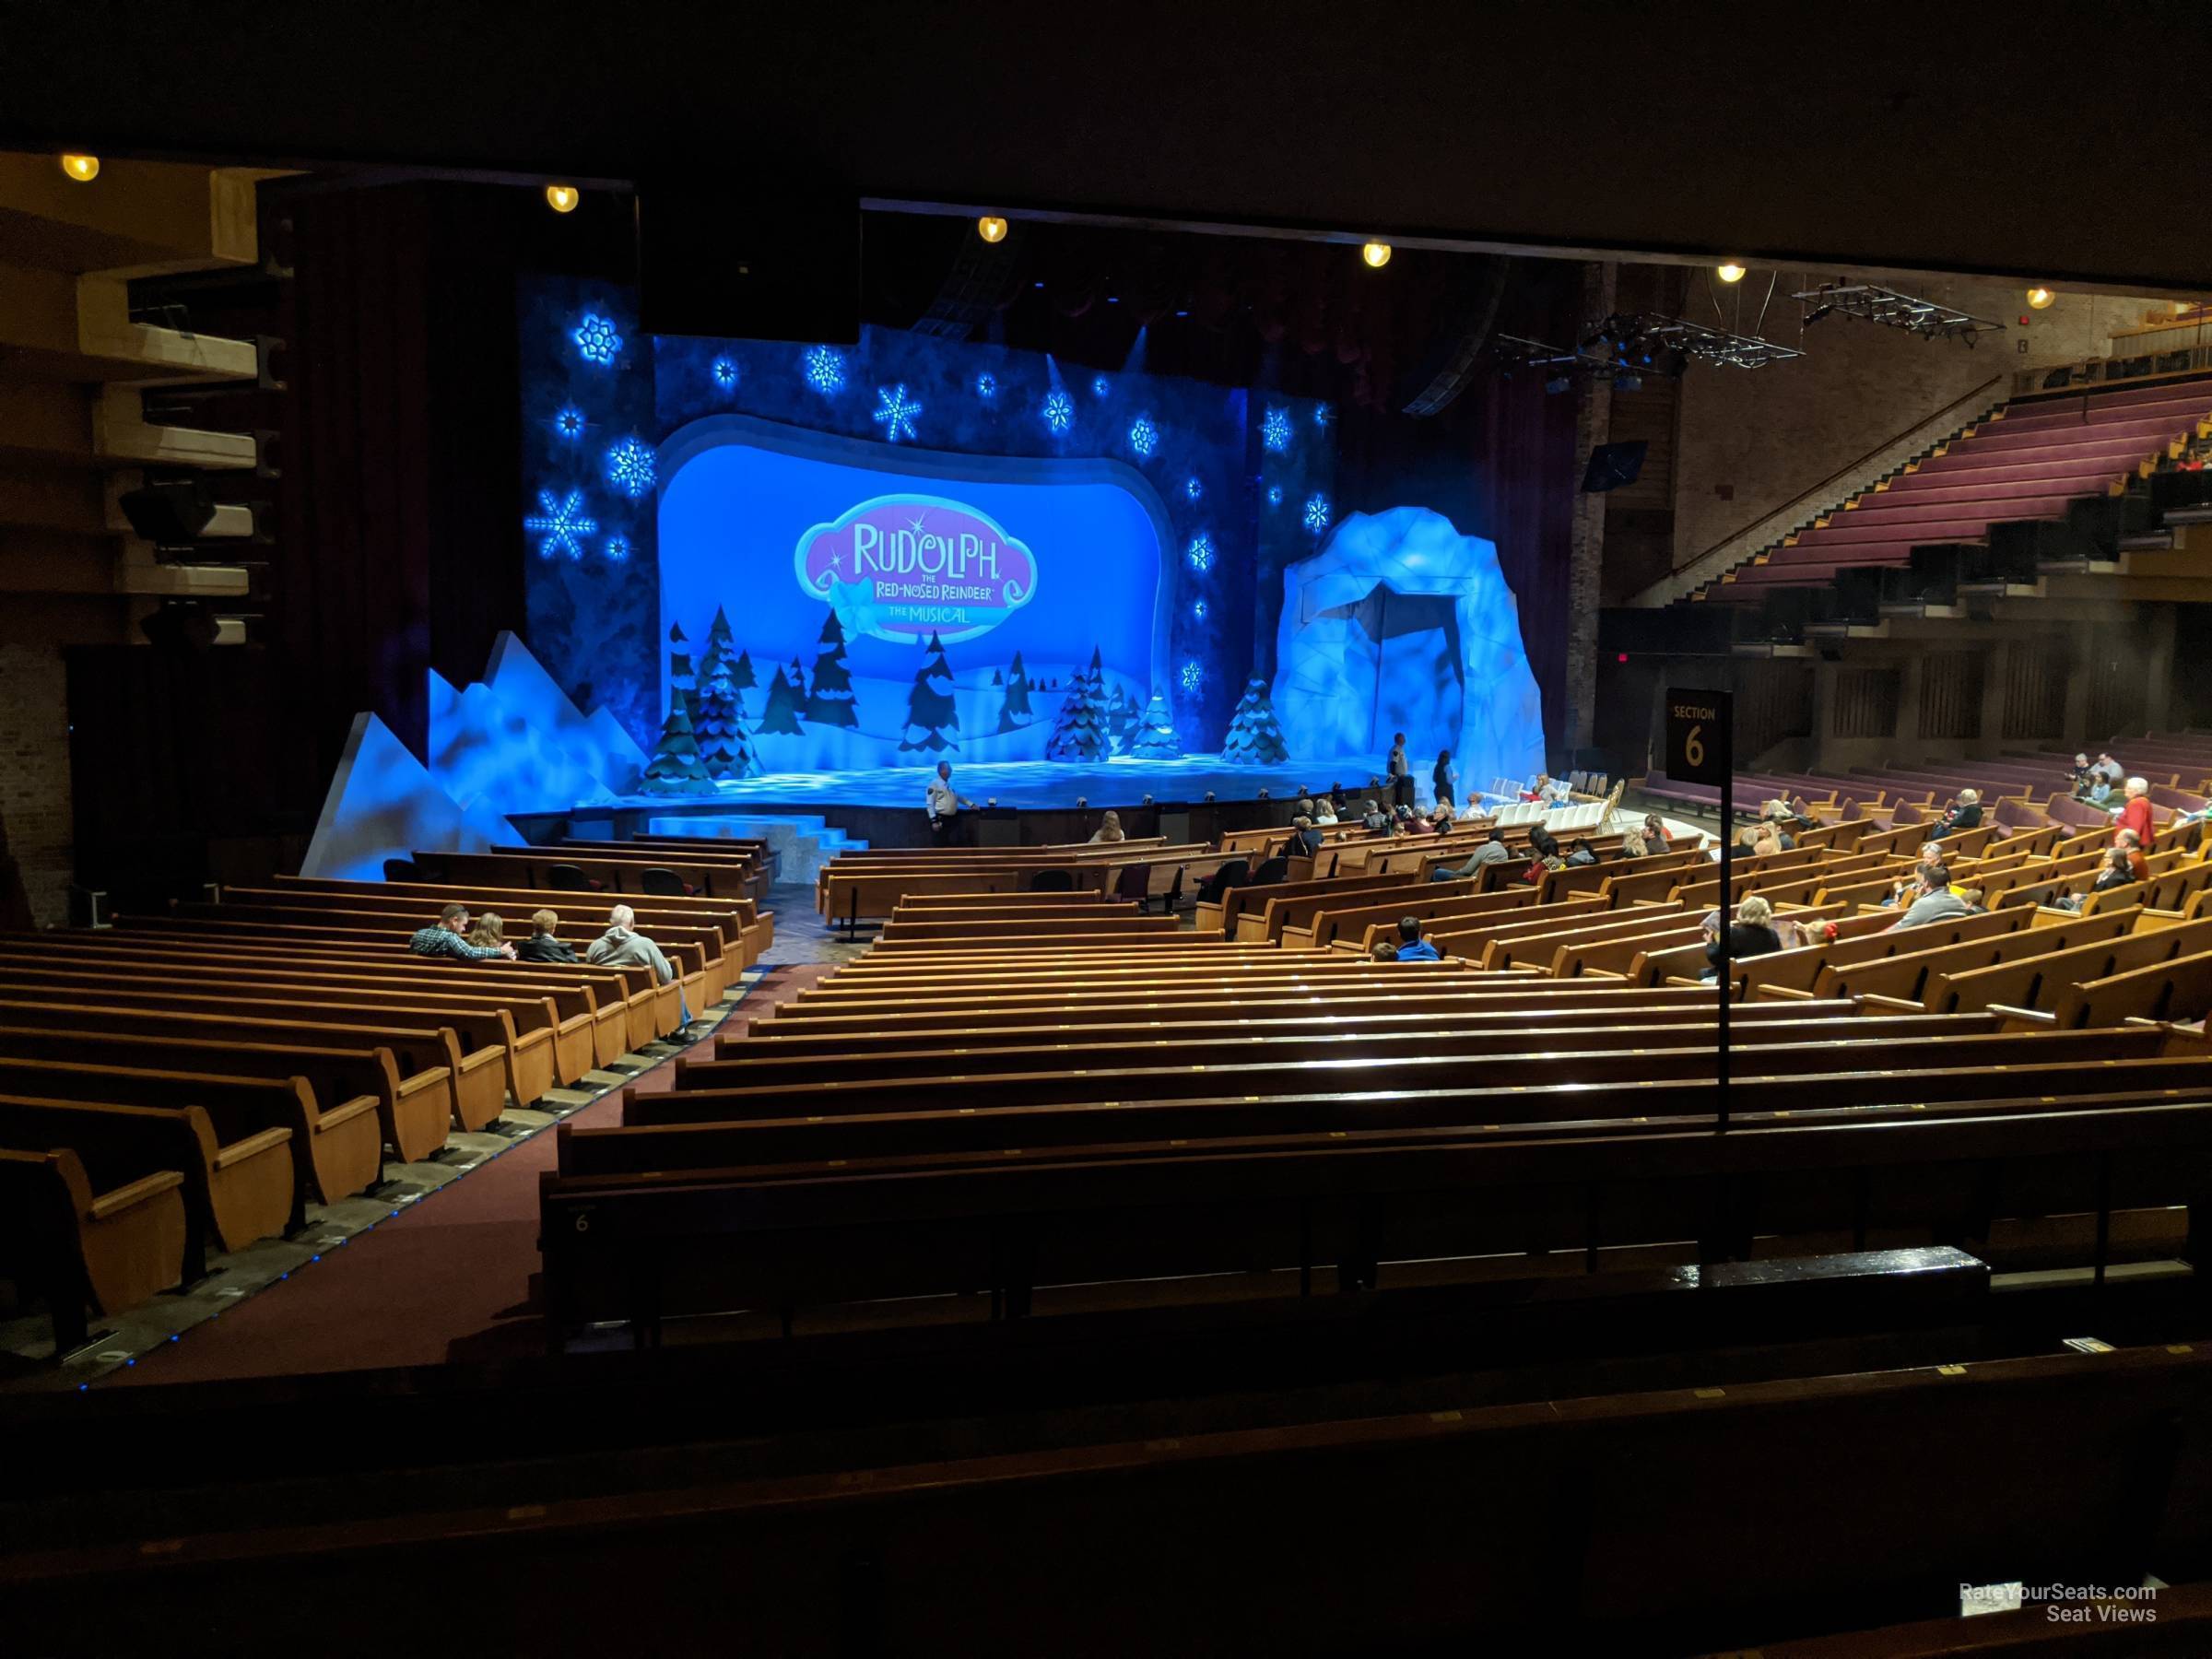 section 14, row w seat view  - grand ole opry house